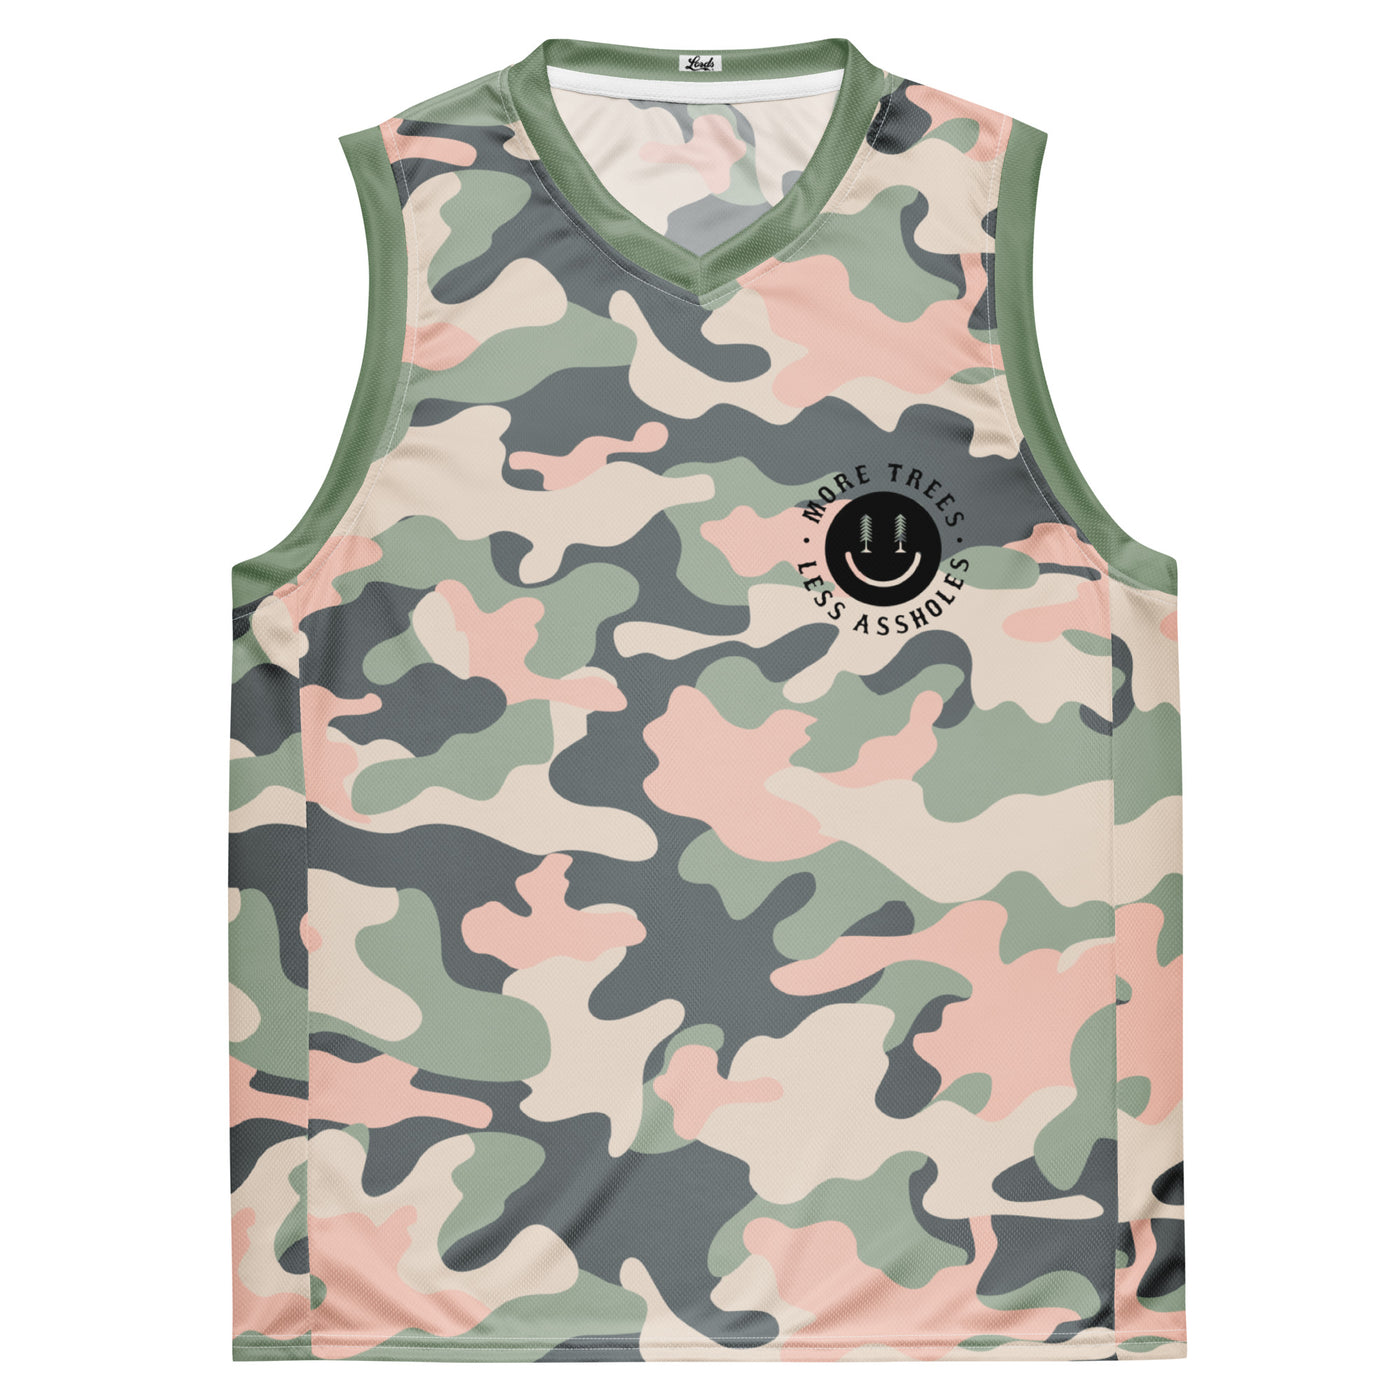 Women's Lords x More Trees Hardwood Jersey - Pink Camo